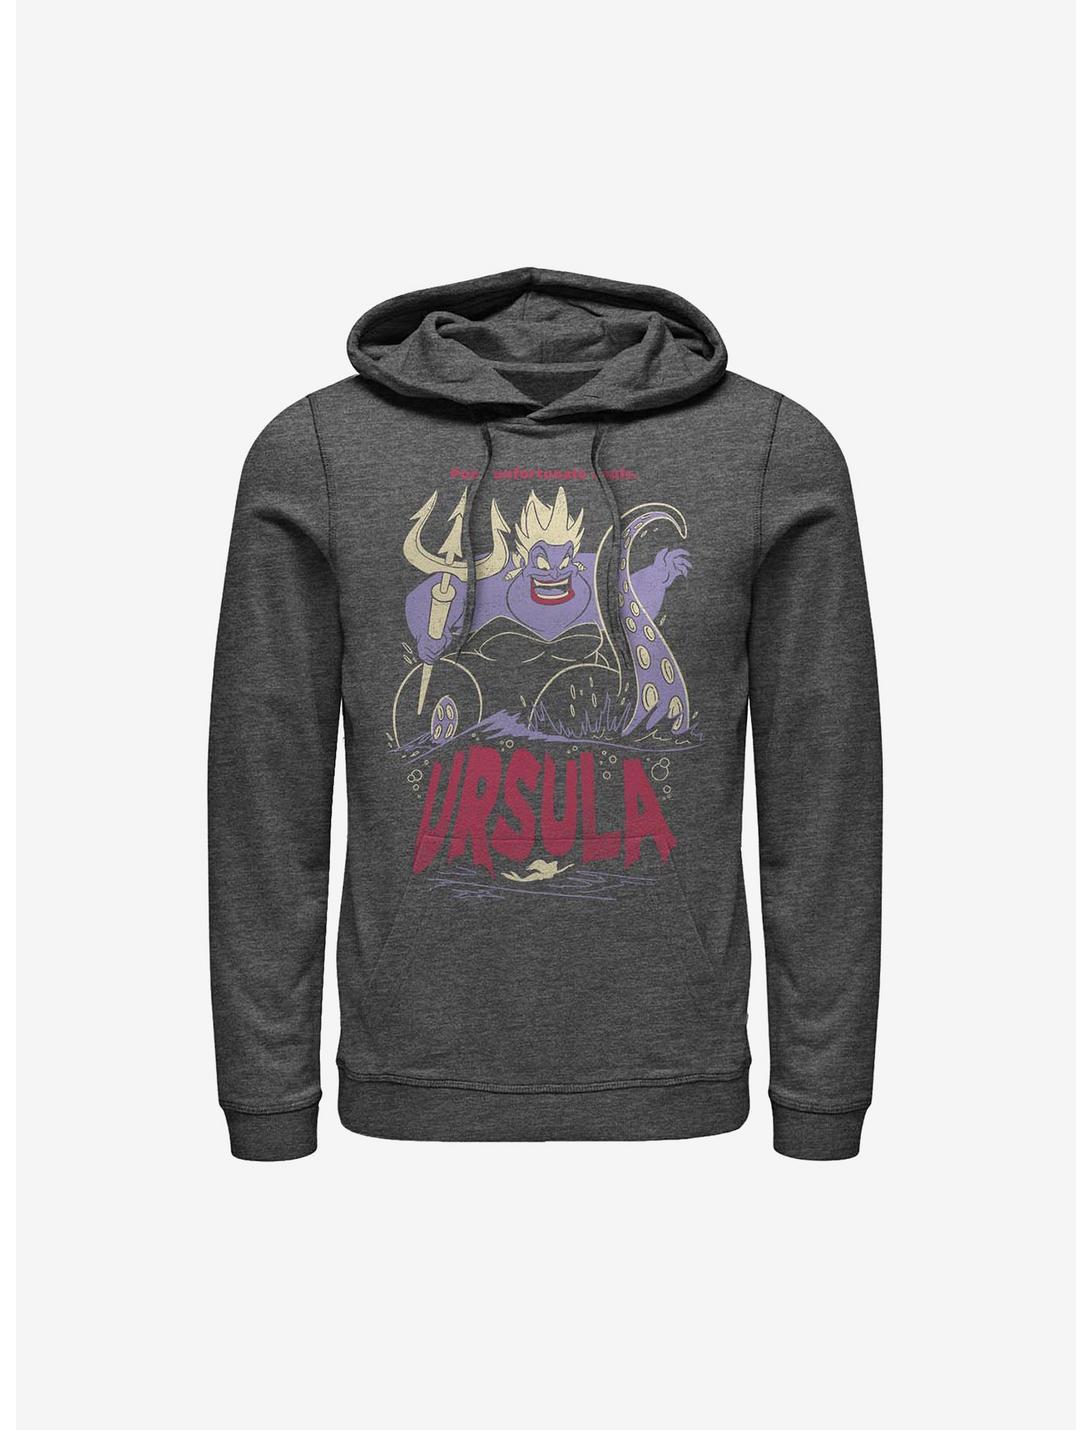 Disney The Little Mermaid Ursula The Sea Witch Hoodie, CHAR HTR, hi-res